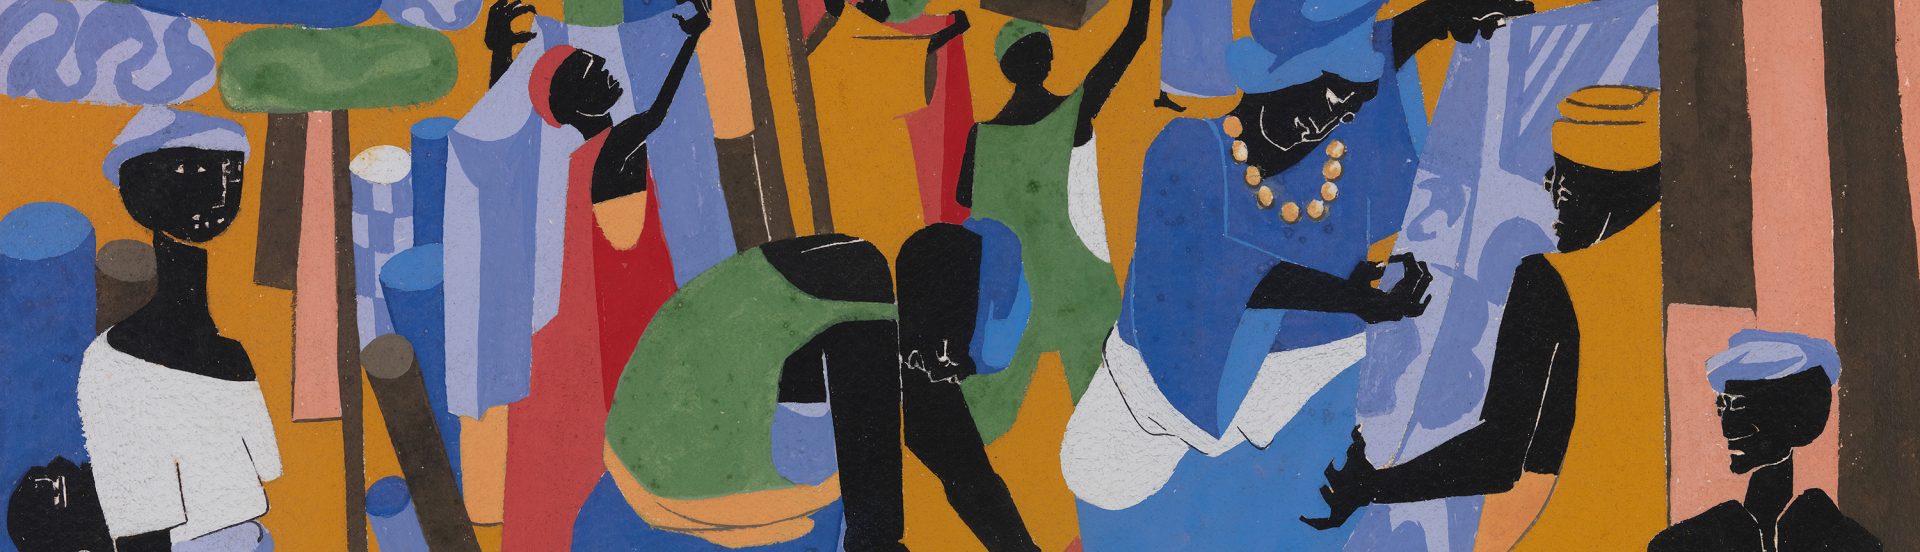 This exhibition explores the connection between African American artist Jacob Lawrence and his contemporaries through the Nigerian publication Black Orpheus. 
